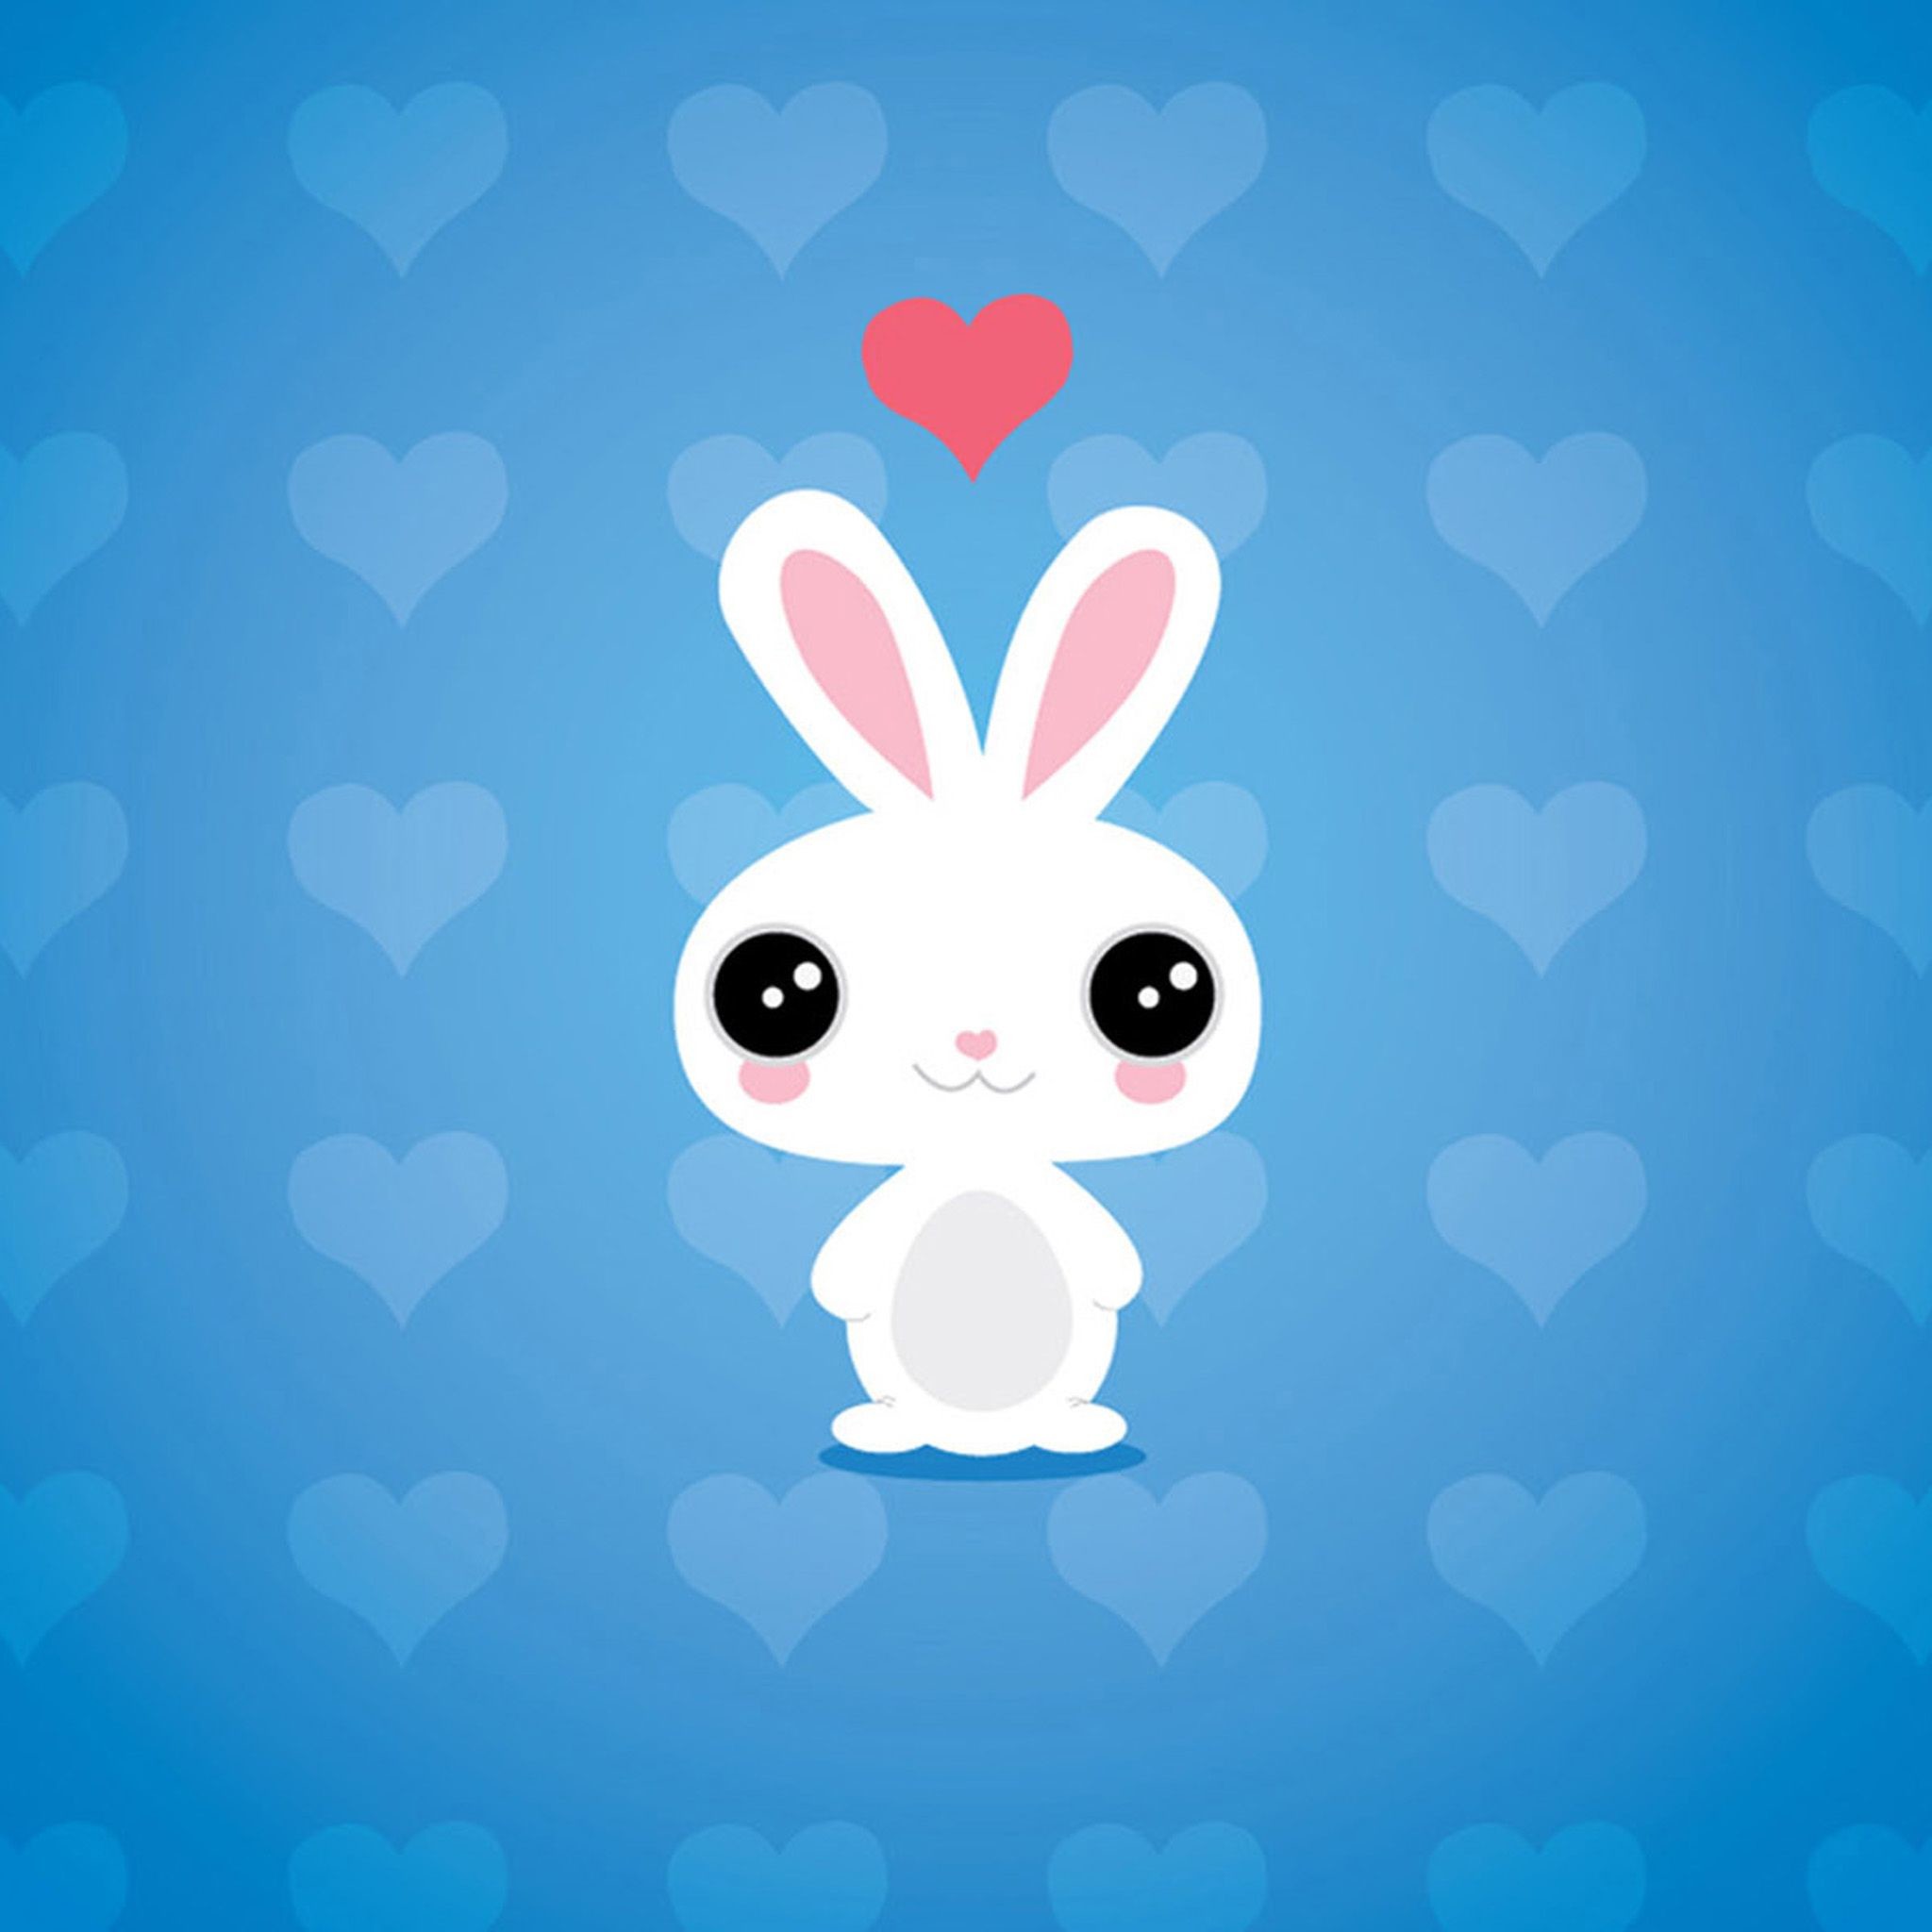 2048x2048 Wallpapers and Pictures BG Collection: Cool Cute Cartoon Images, Alaine  Rosinski for PC & Mac, Tablet, Laptop, ...